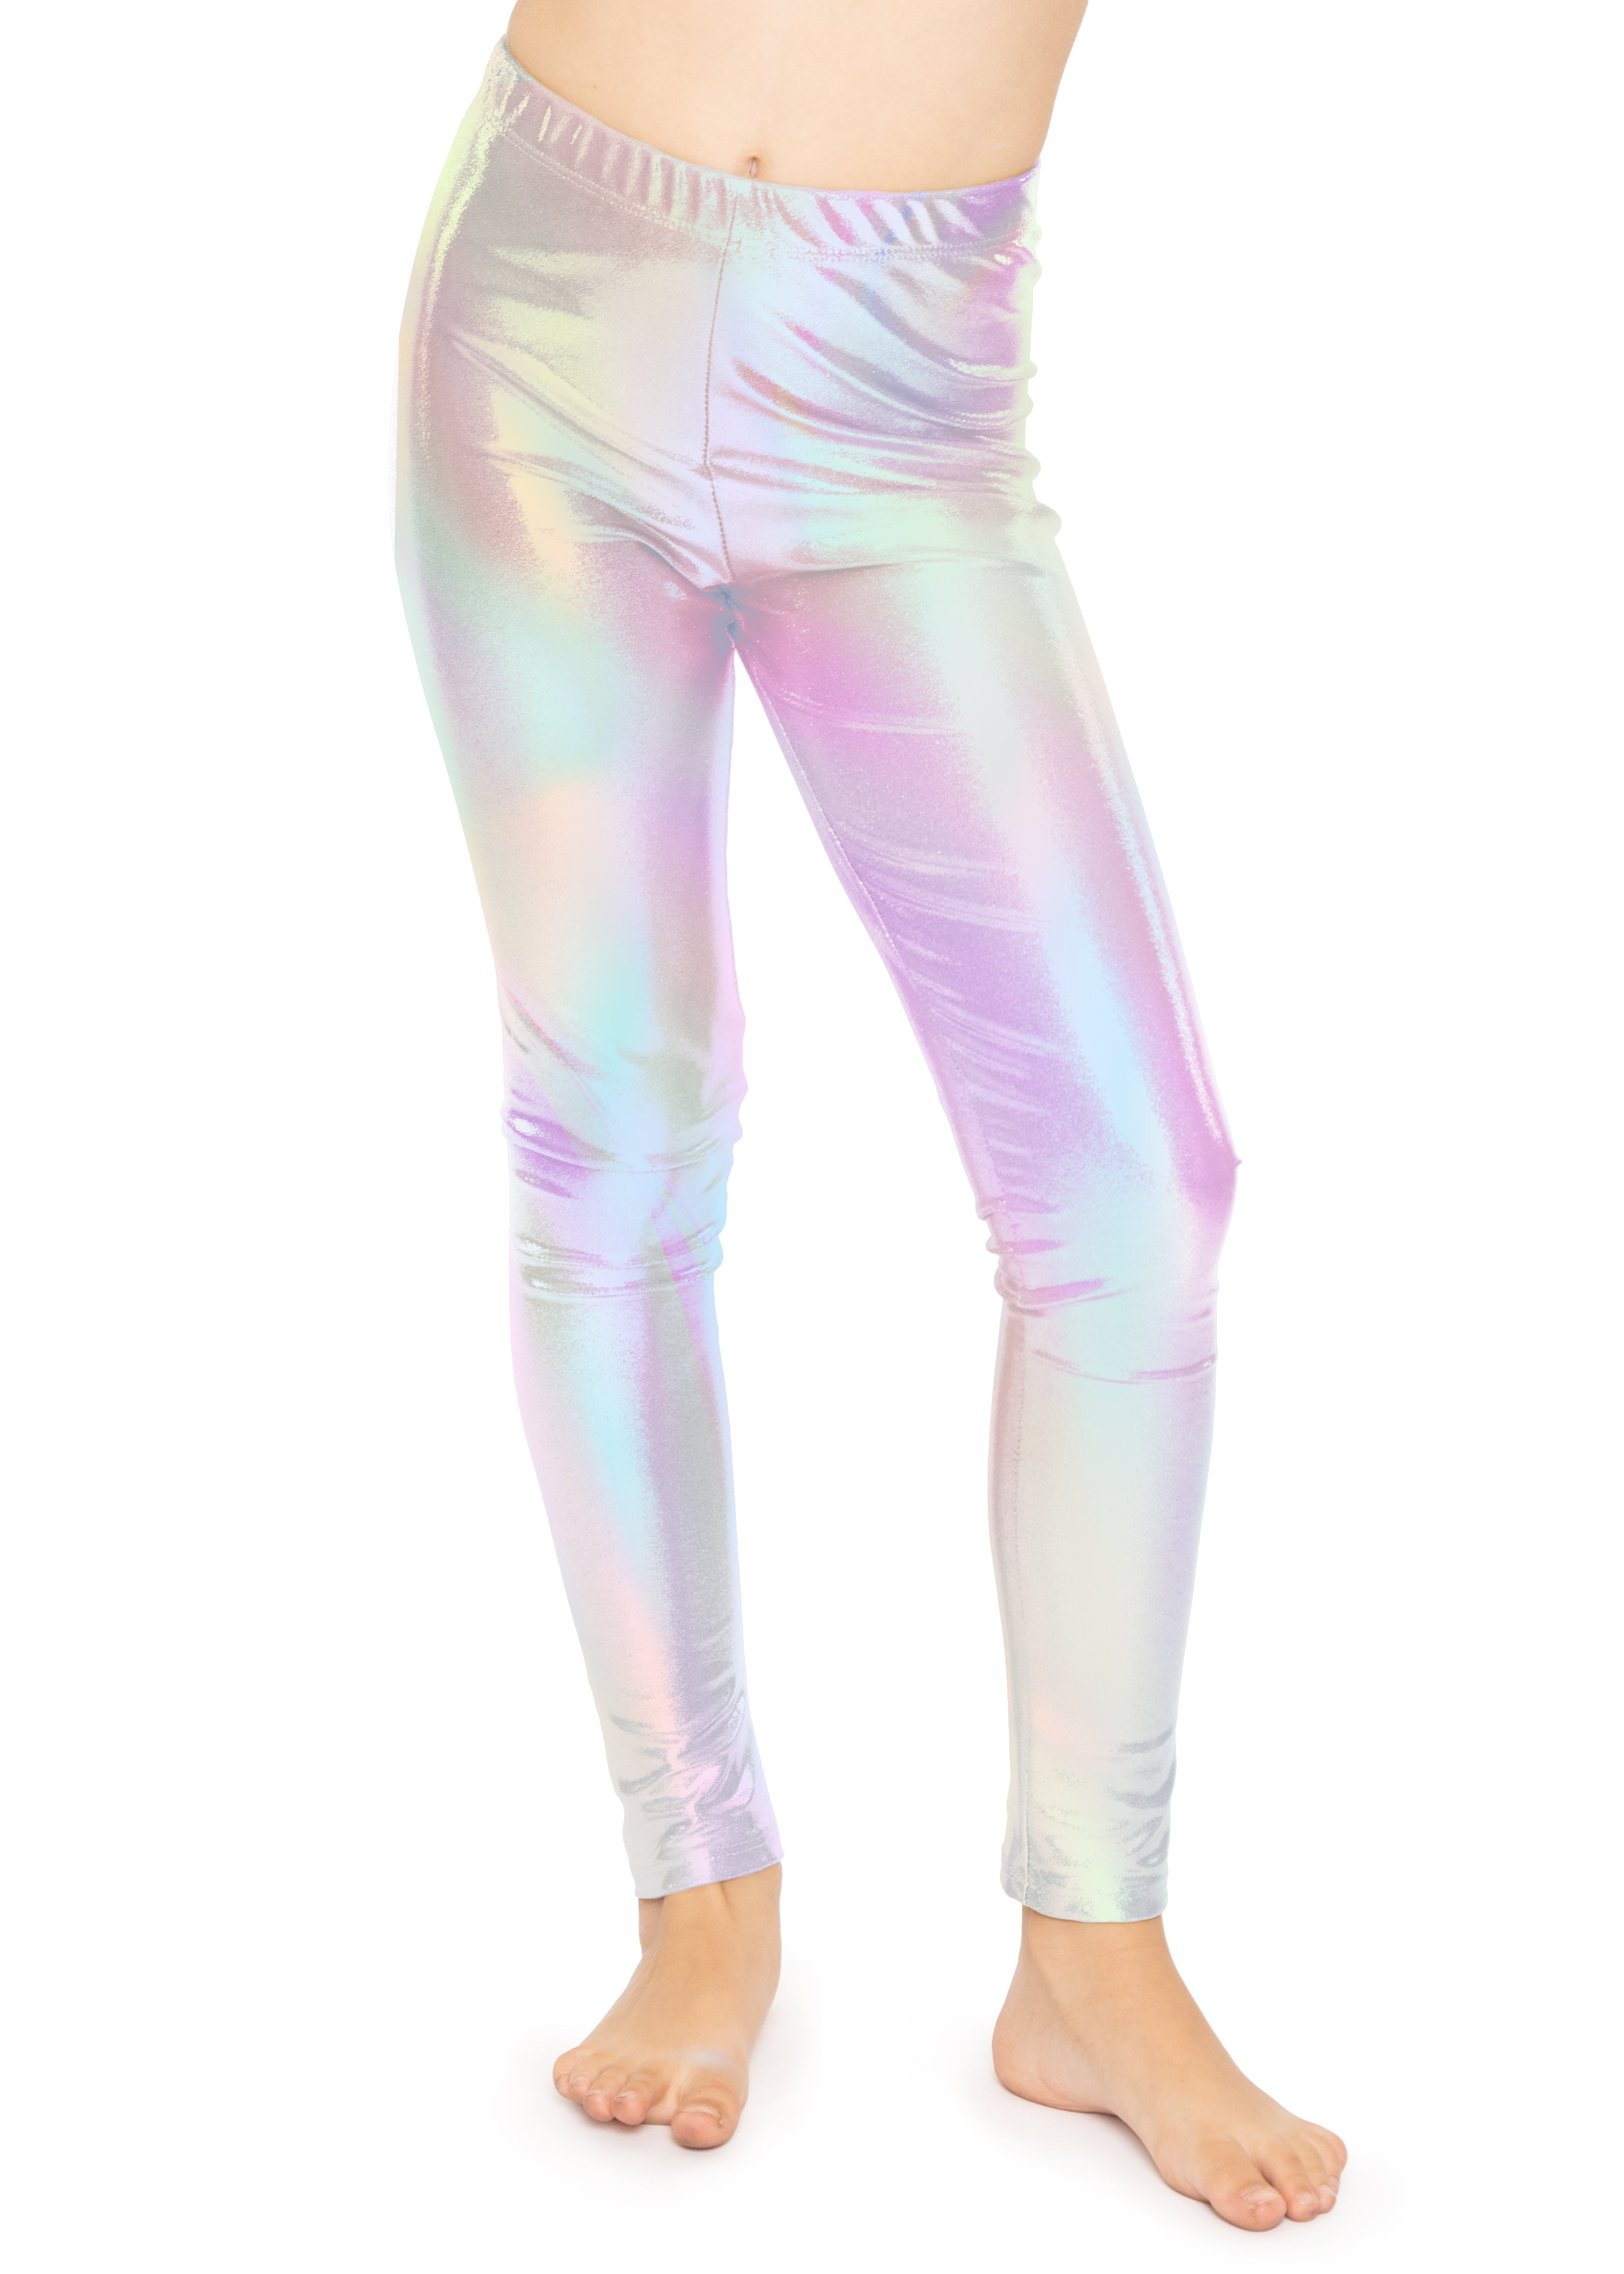 Stretch Is Comfort Girl's Metallic Mystique Leggings Shiny and Stretchy